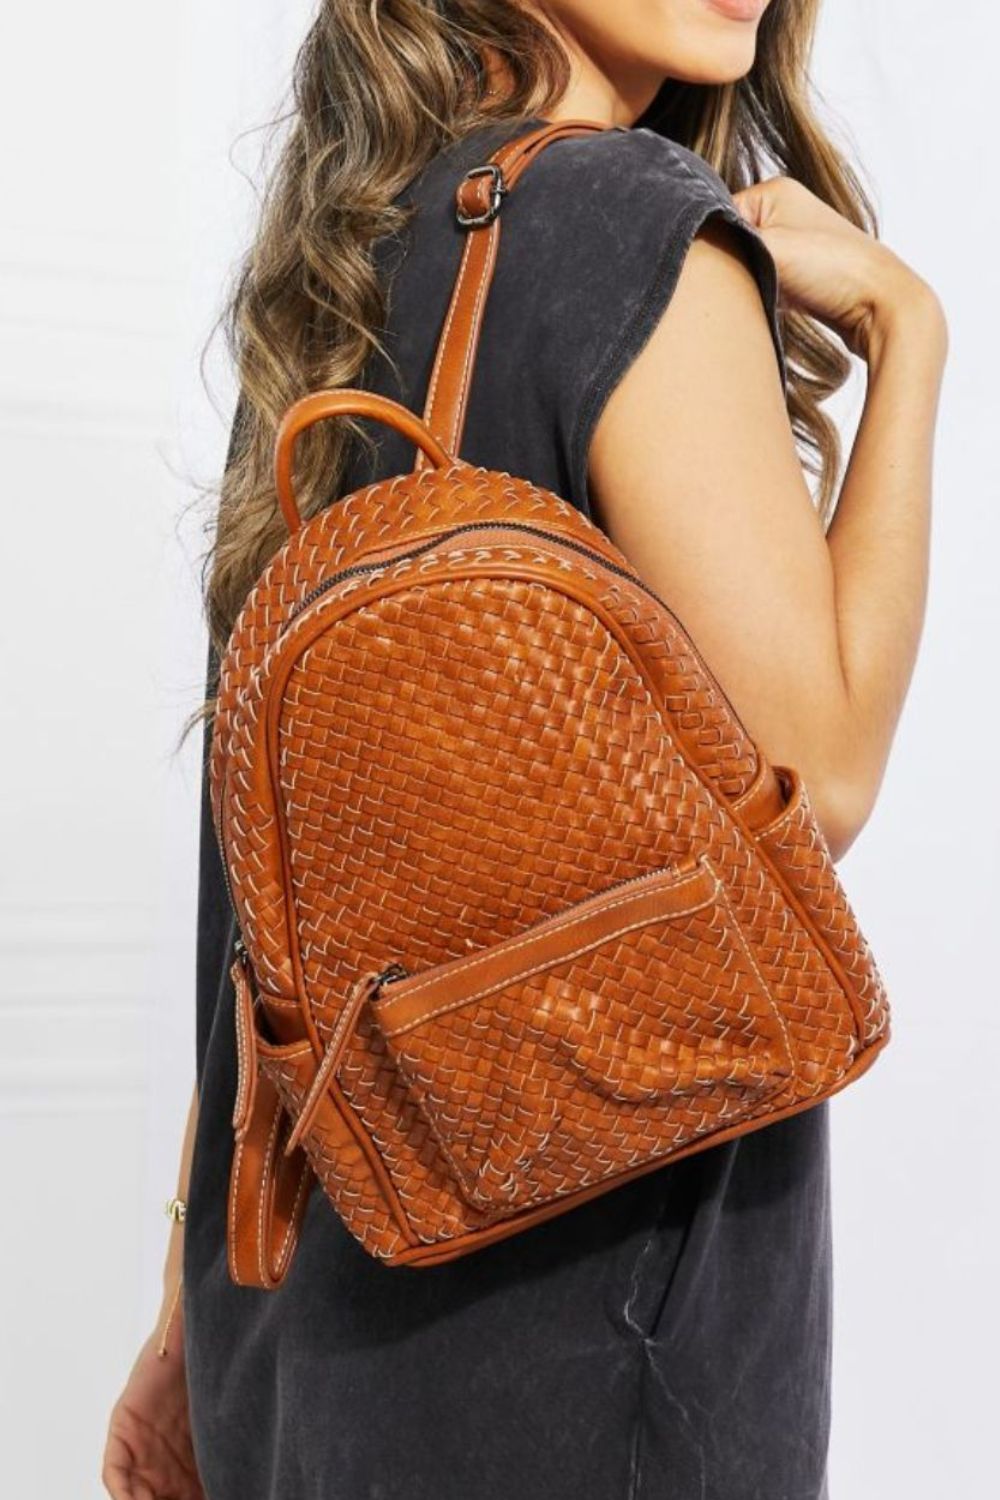 SHOMICO Certainly Chic Faux Leather Woven Backpack.